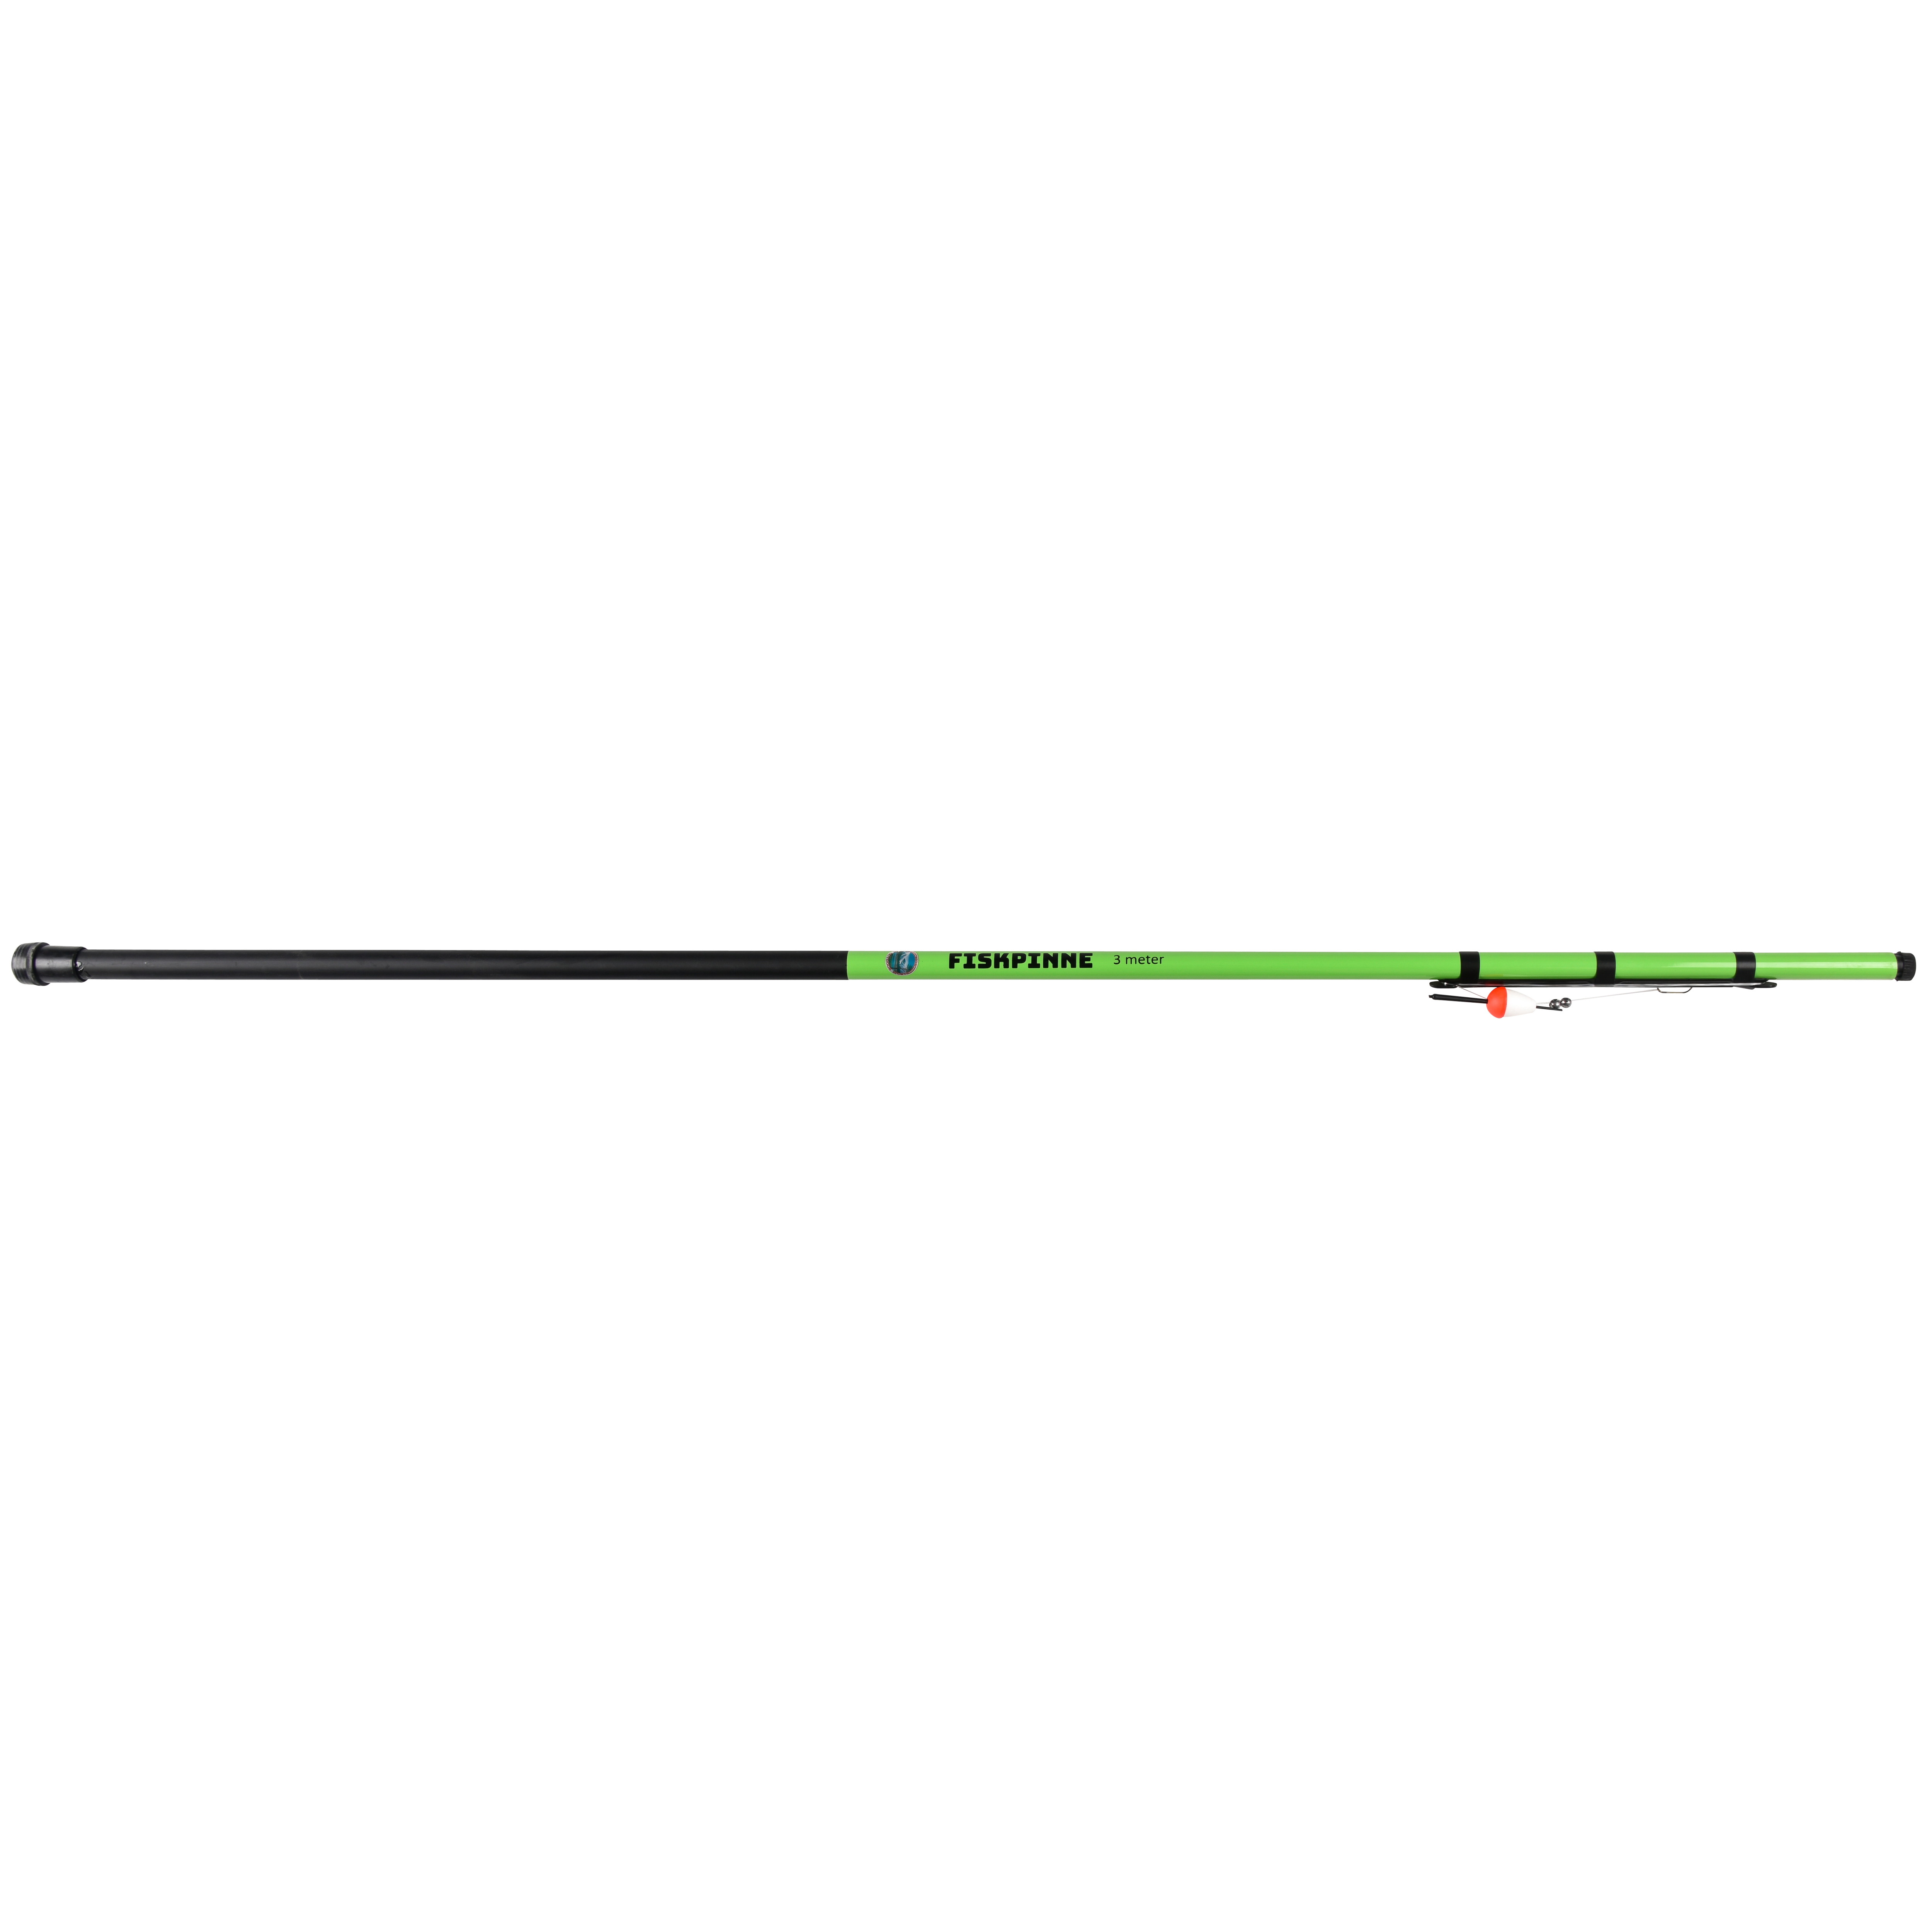 iFish Fiskpinne 3m Lime, Buy iFish Fiskpinne 3m Lime here